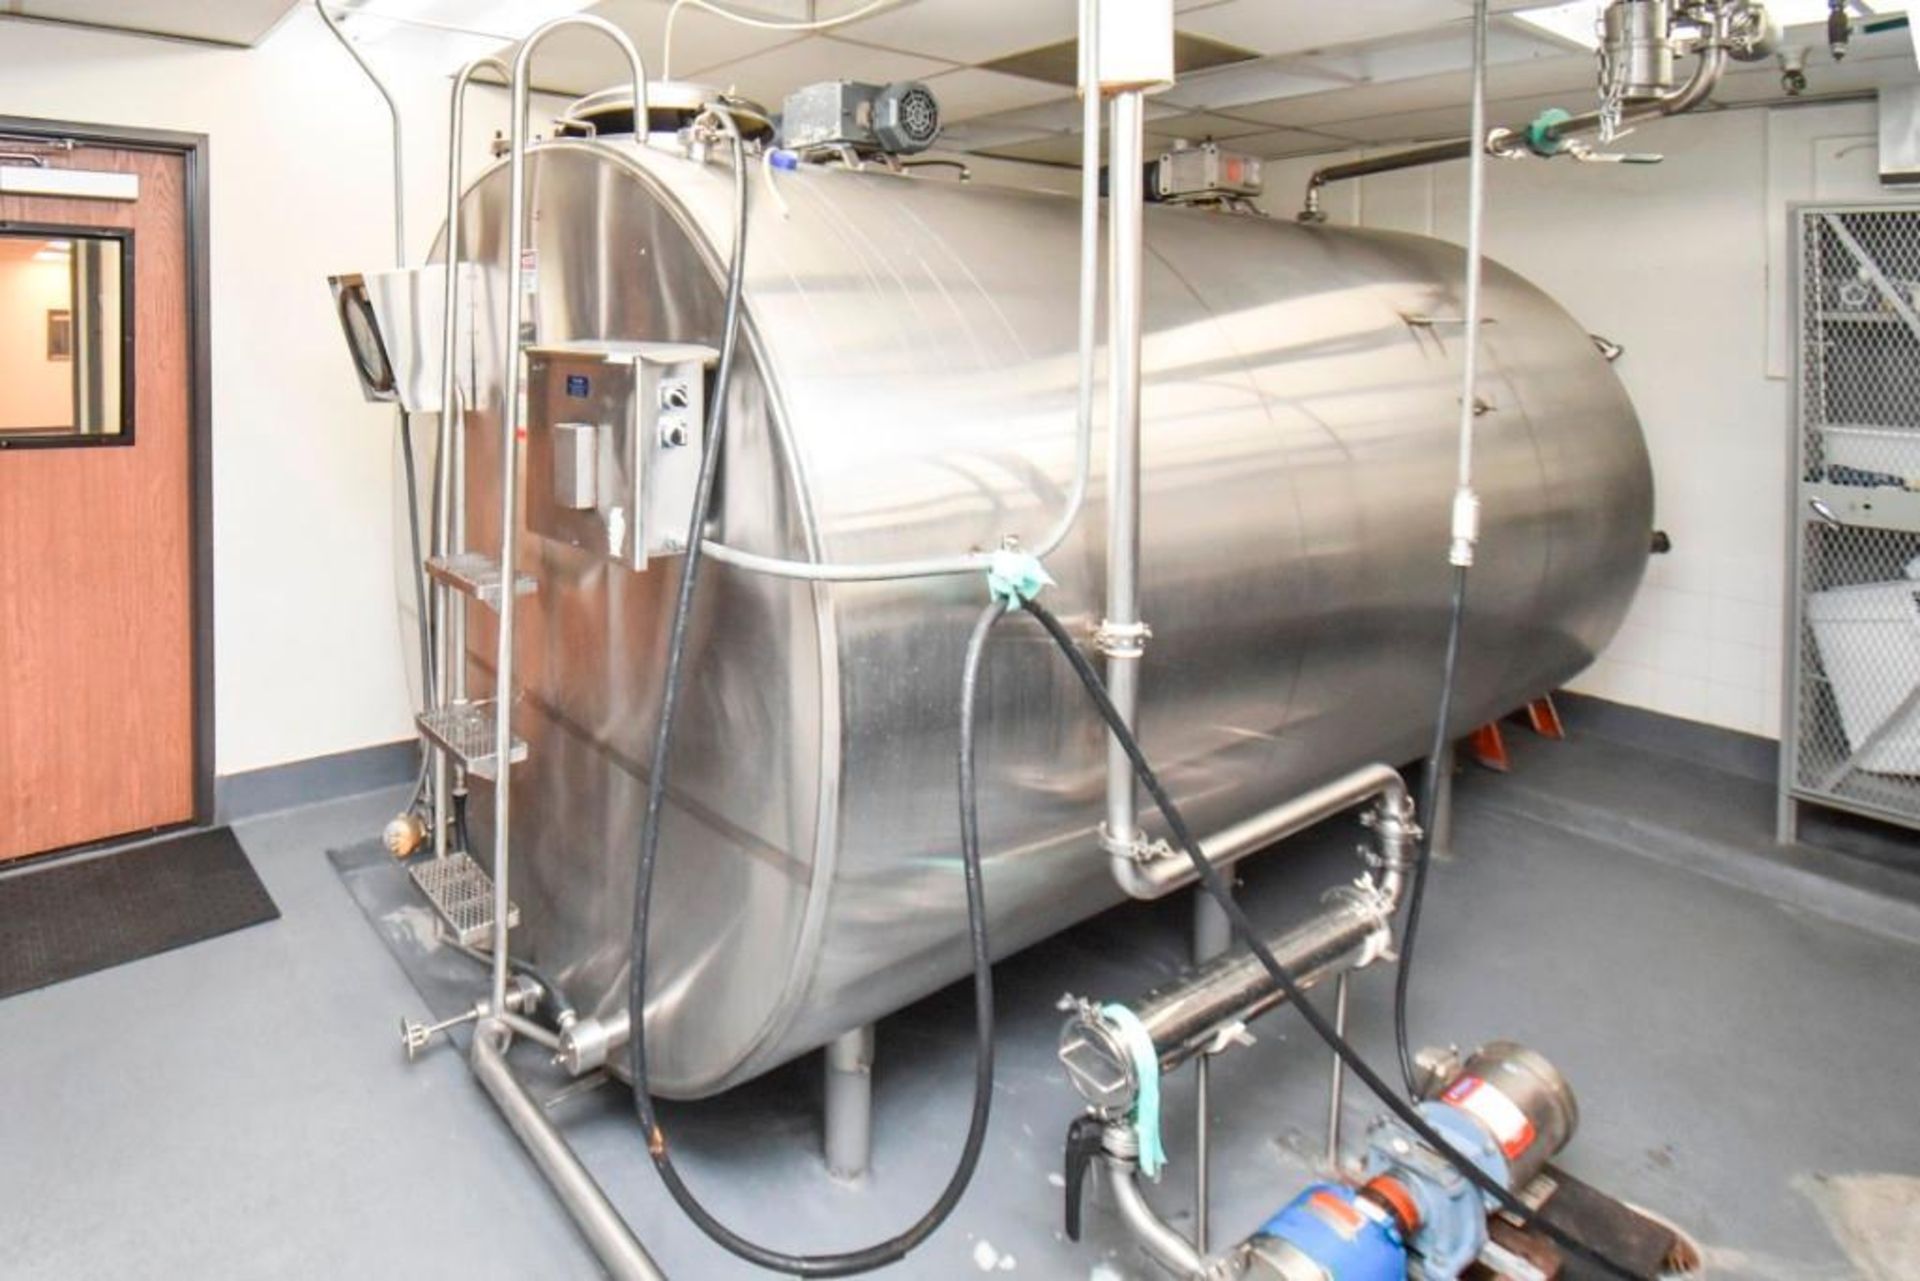 Schweitzer's 2000 Gallon Tank with Freon Cooling System